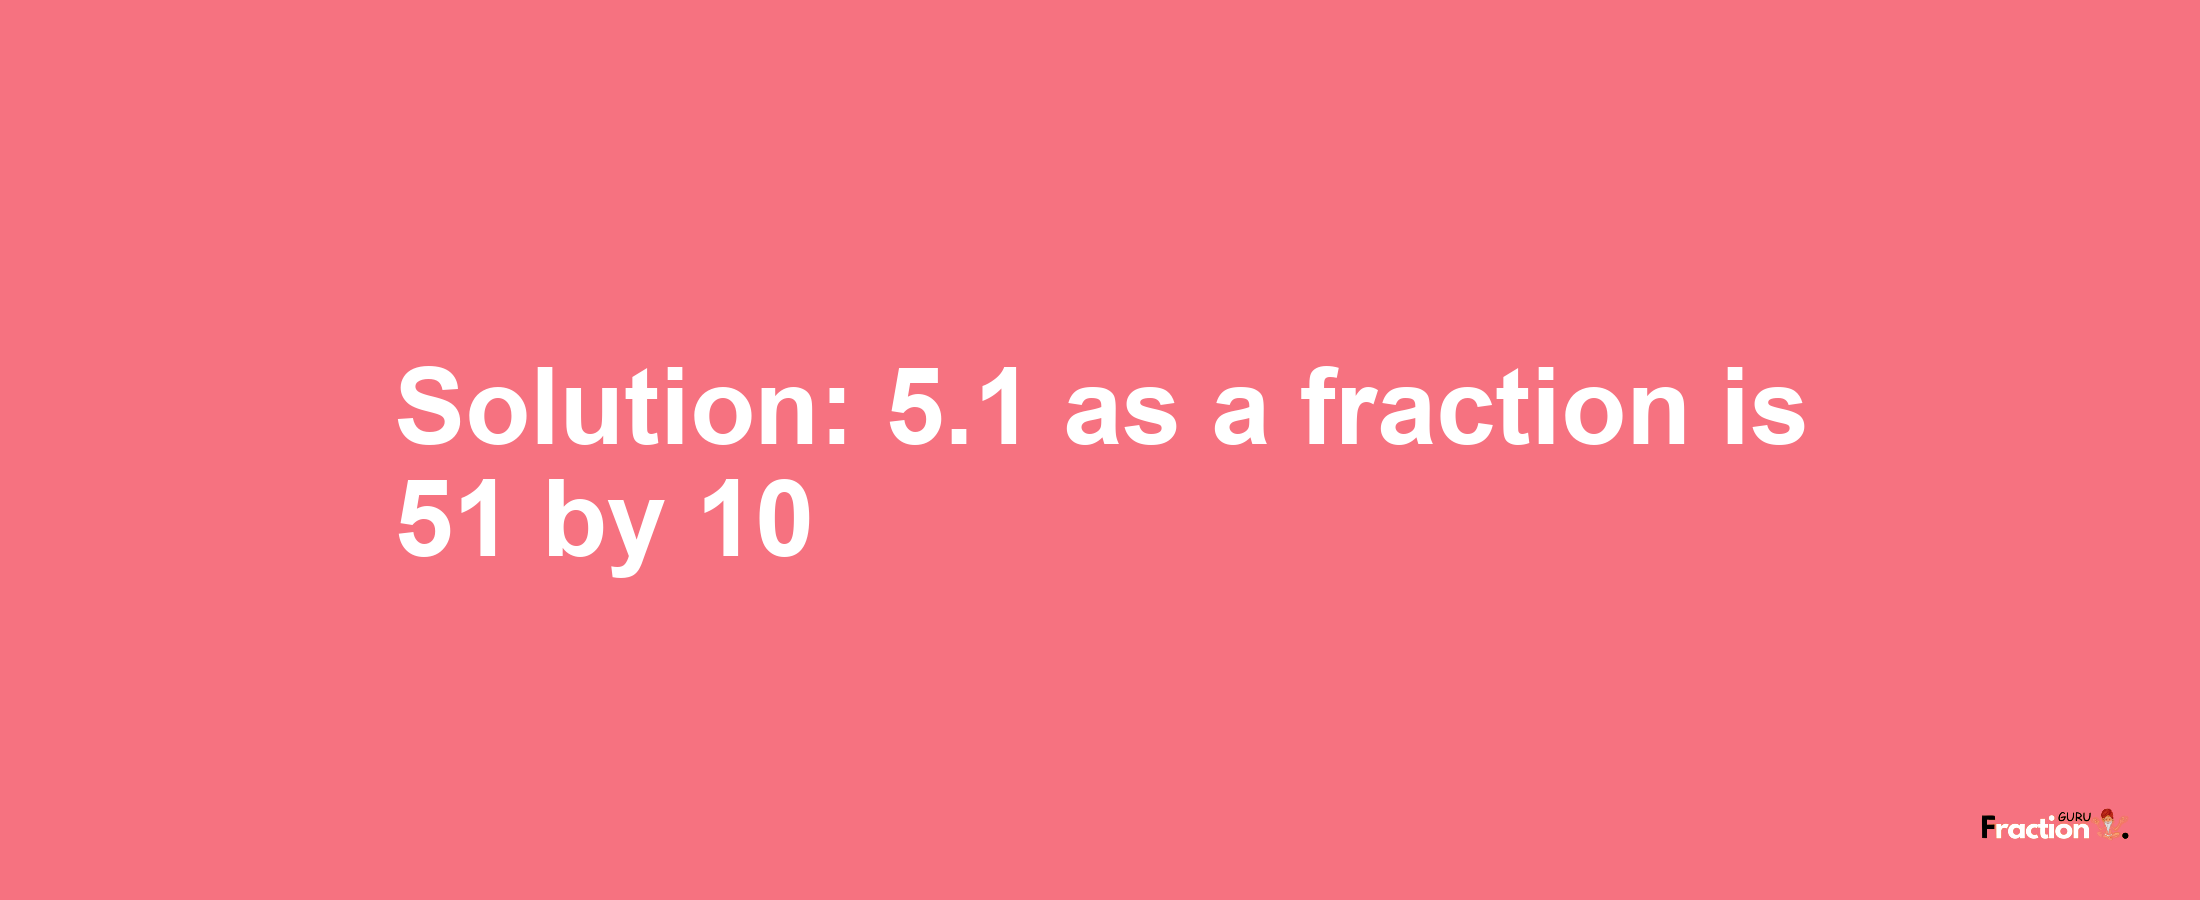 Solution:5.1 as a fraction is 51/10